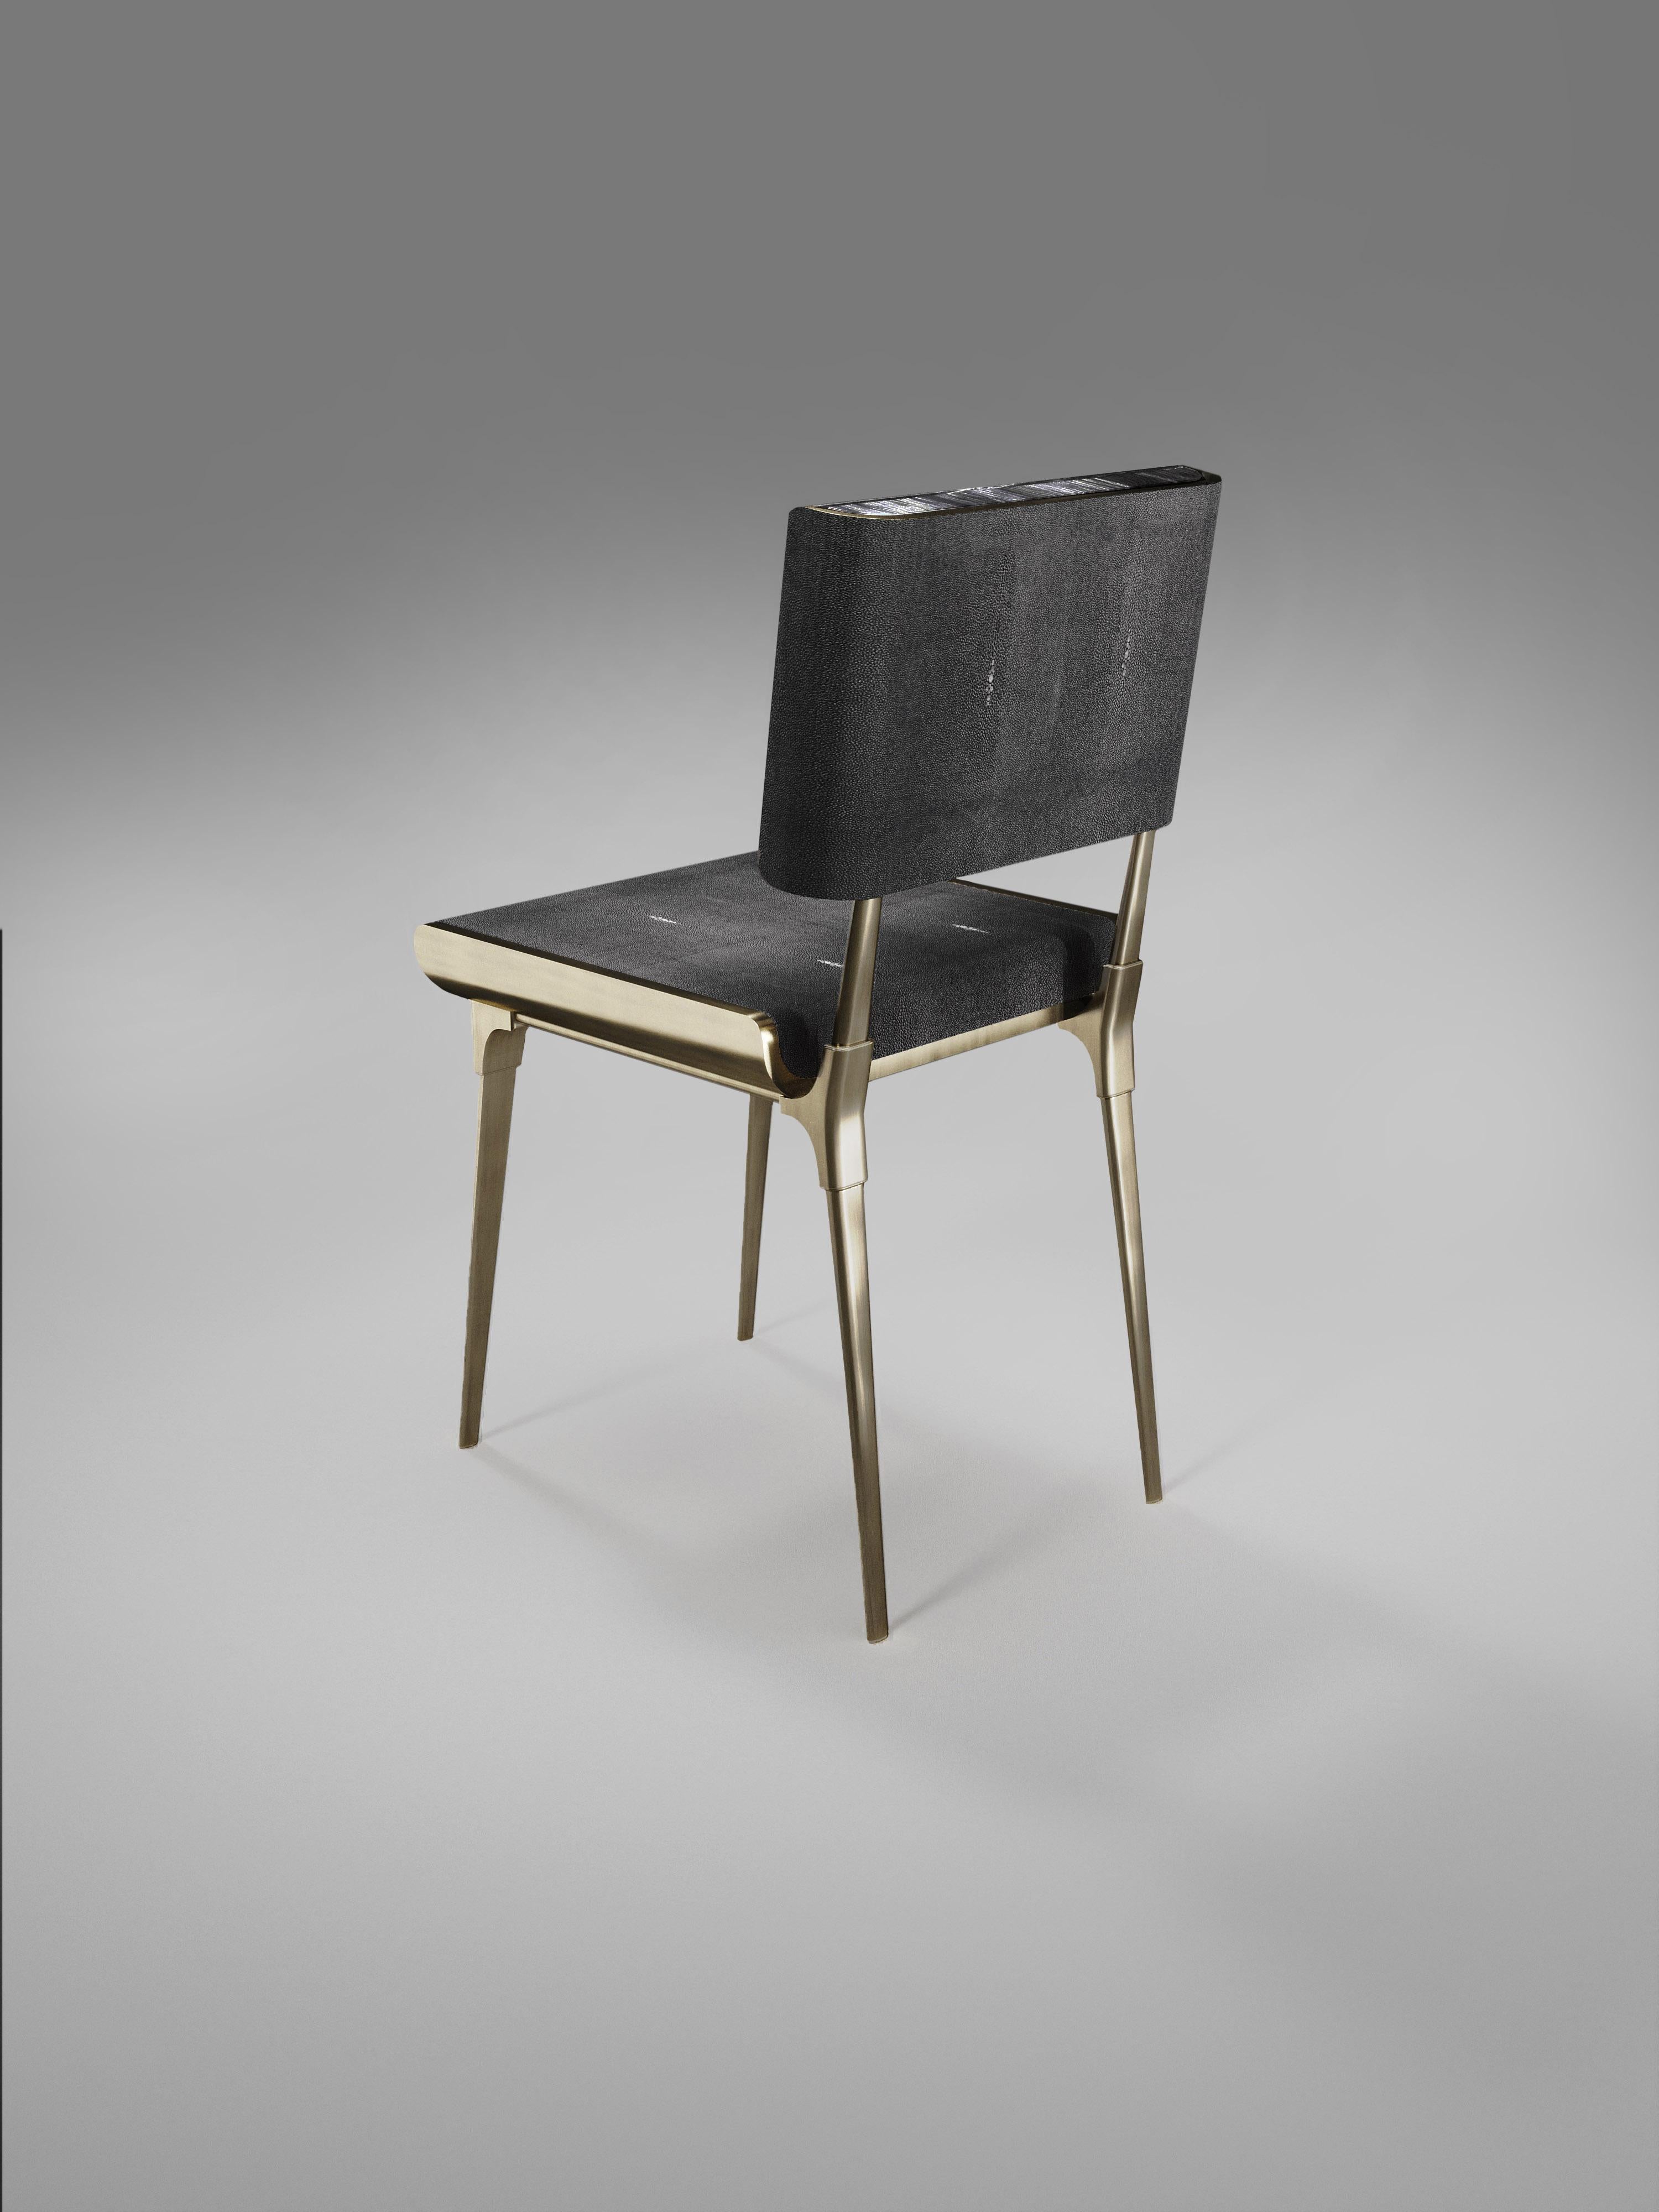 Inspired by the original Dandy bench by Kifu Paris (see images at end of slide), the Dandy II Chair is the ultimate luxury seating for a dining room or corner area. The seating area is inlaid in coal black shagreen and the legs, frame and sides of